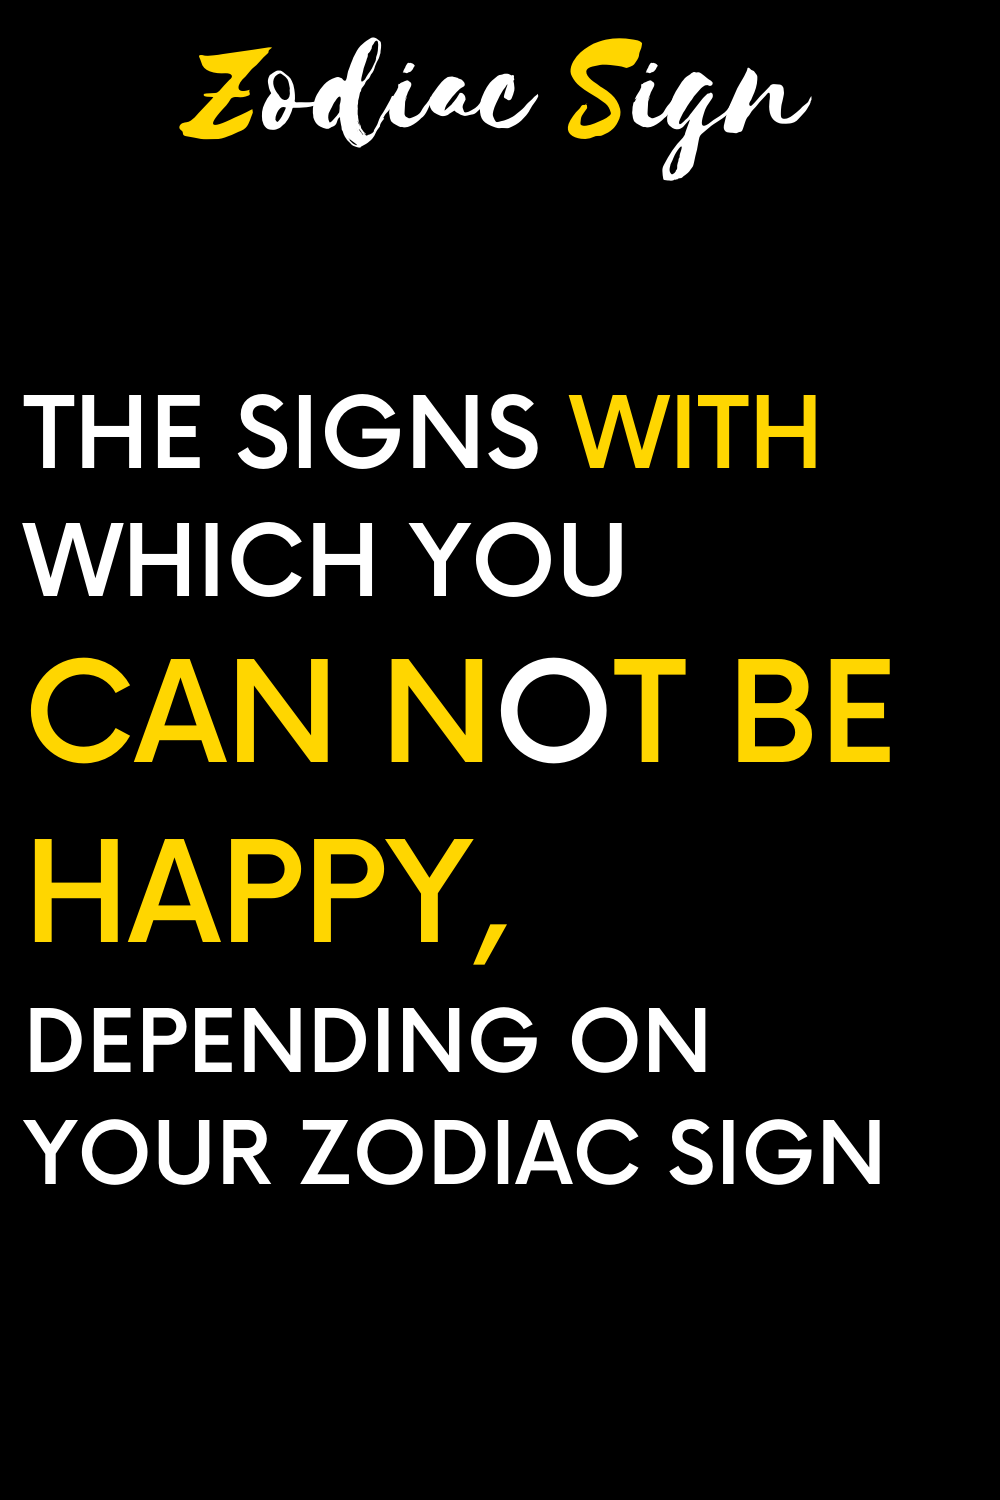 The signs with which you can not be happy, depending on your zodiac sign